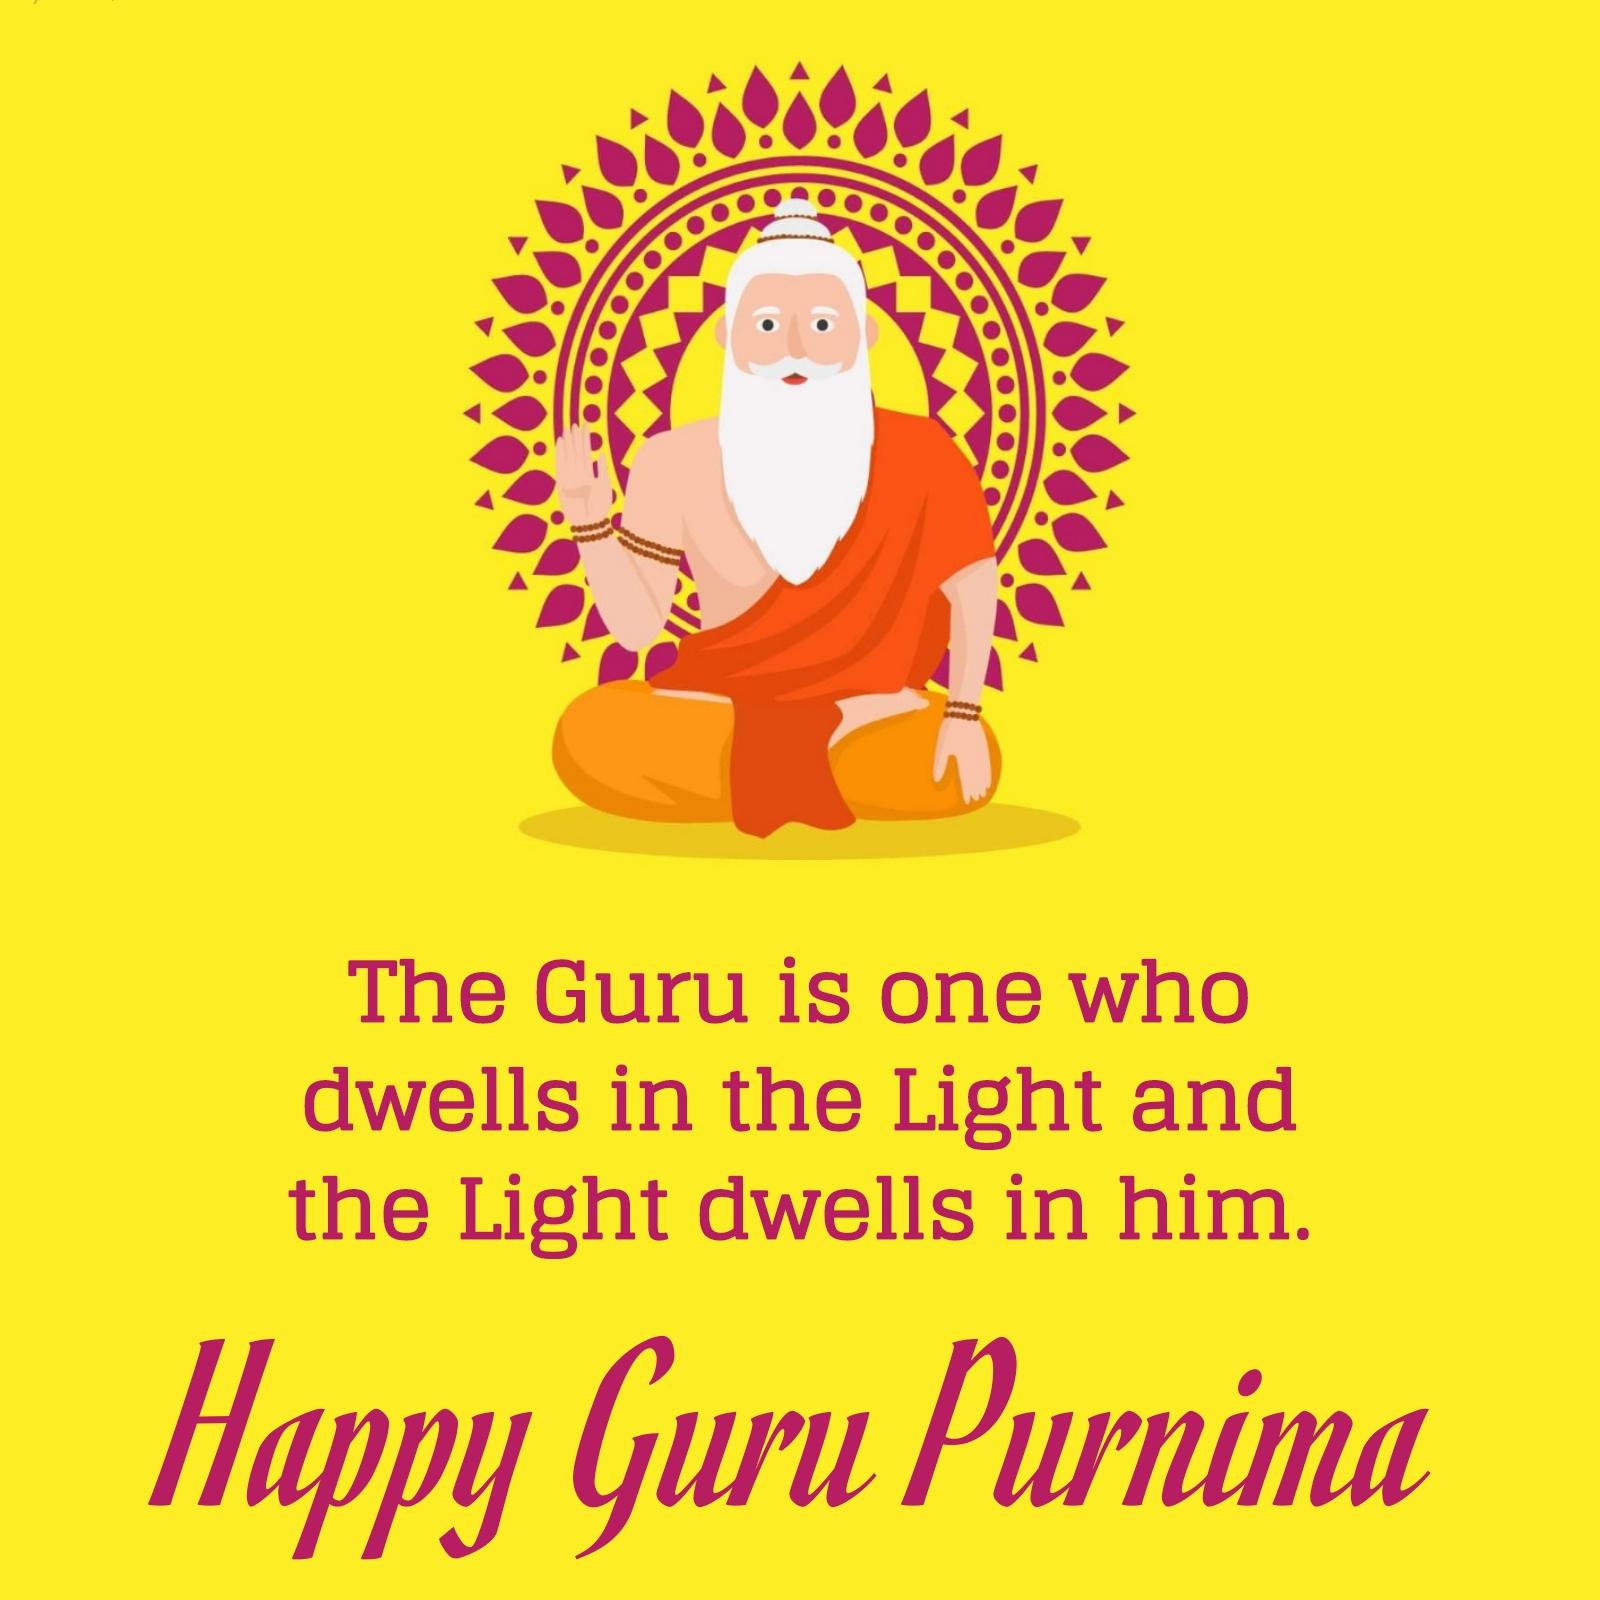 The Guru is one who dwells in the Light and the Light dwells in him